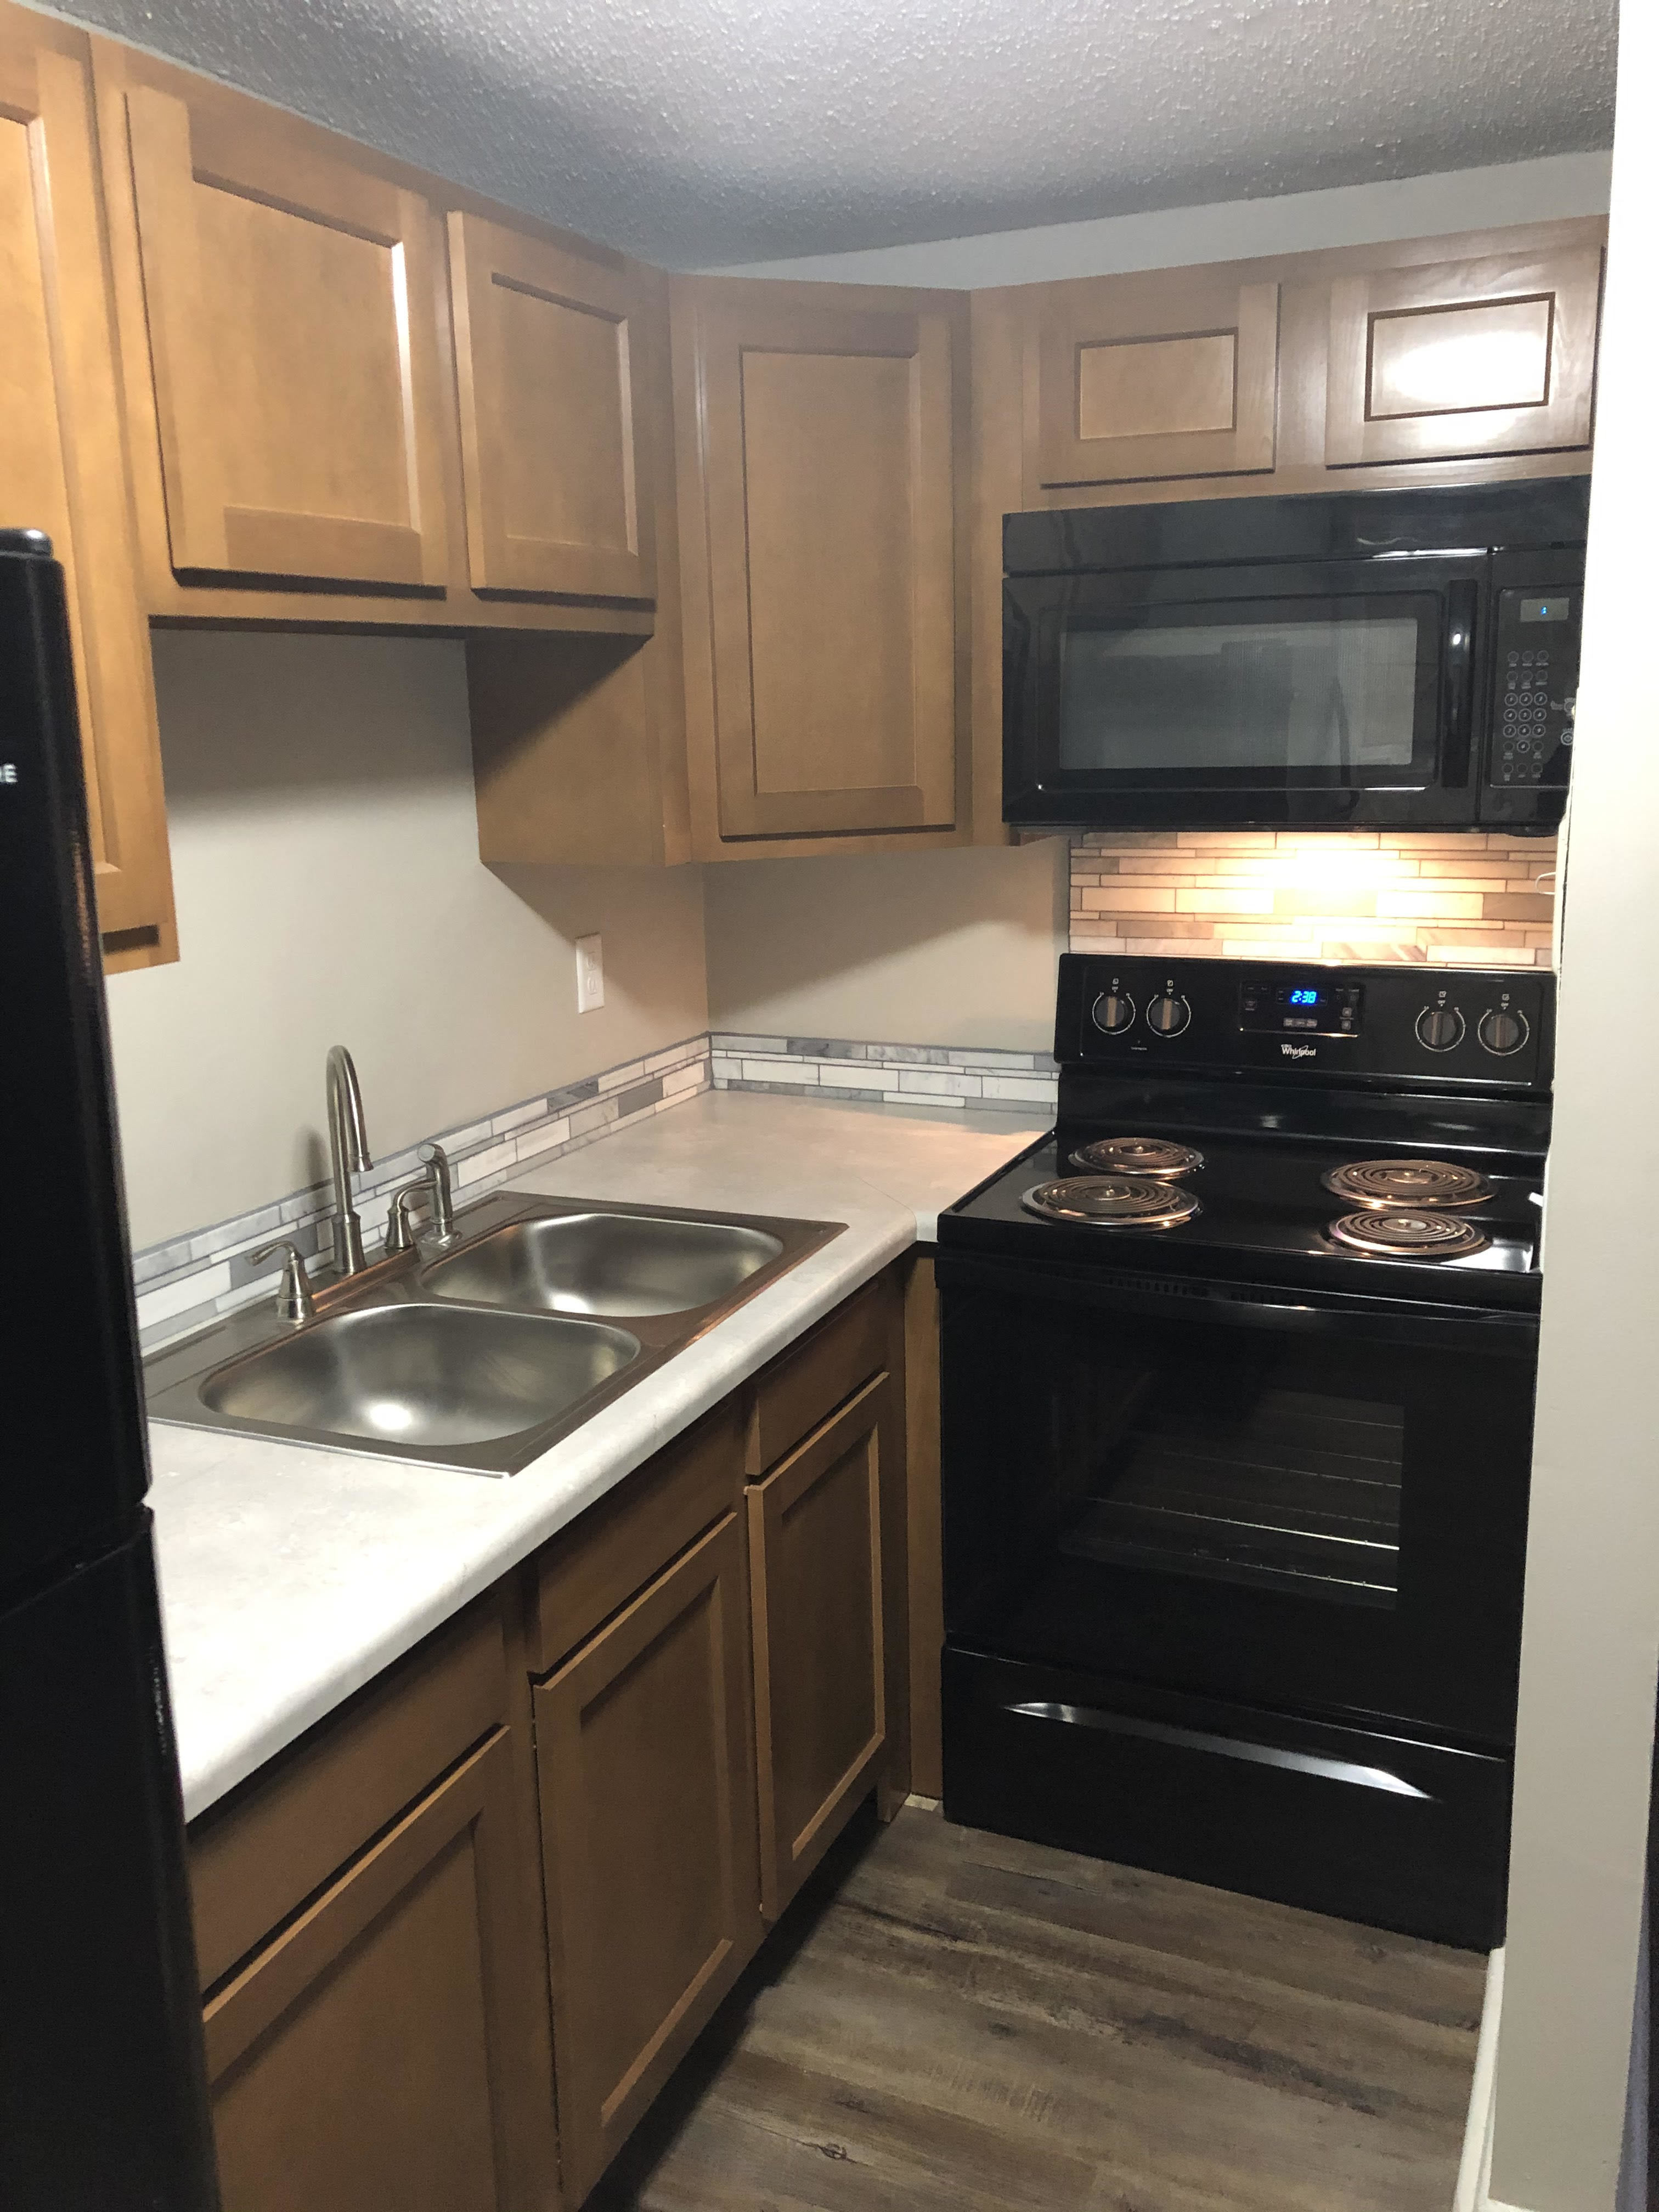 Newly renovated kitchen with black appliances and light brown cabinets